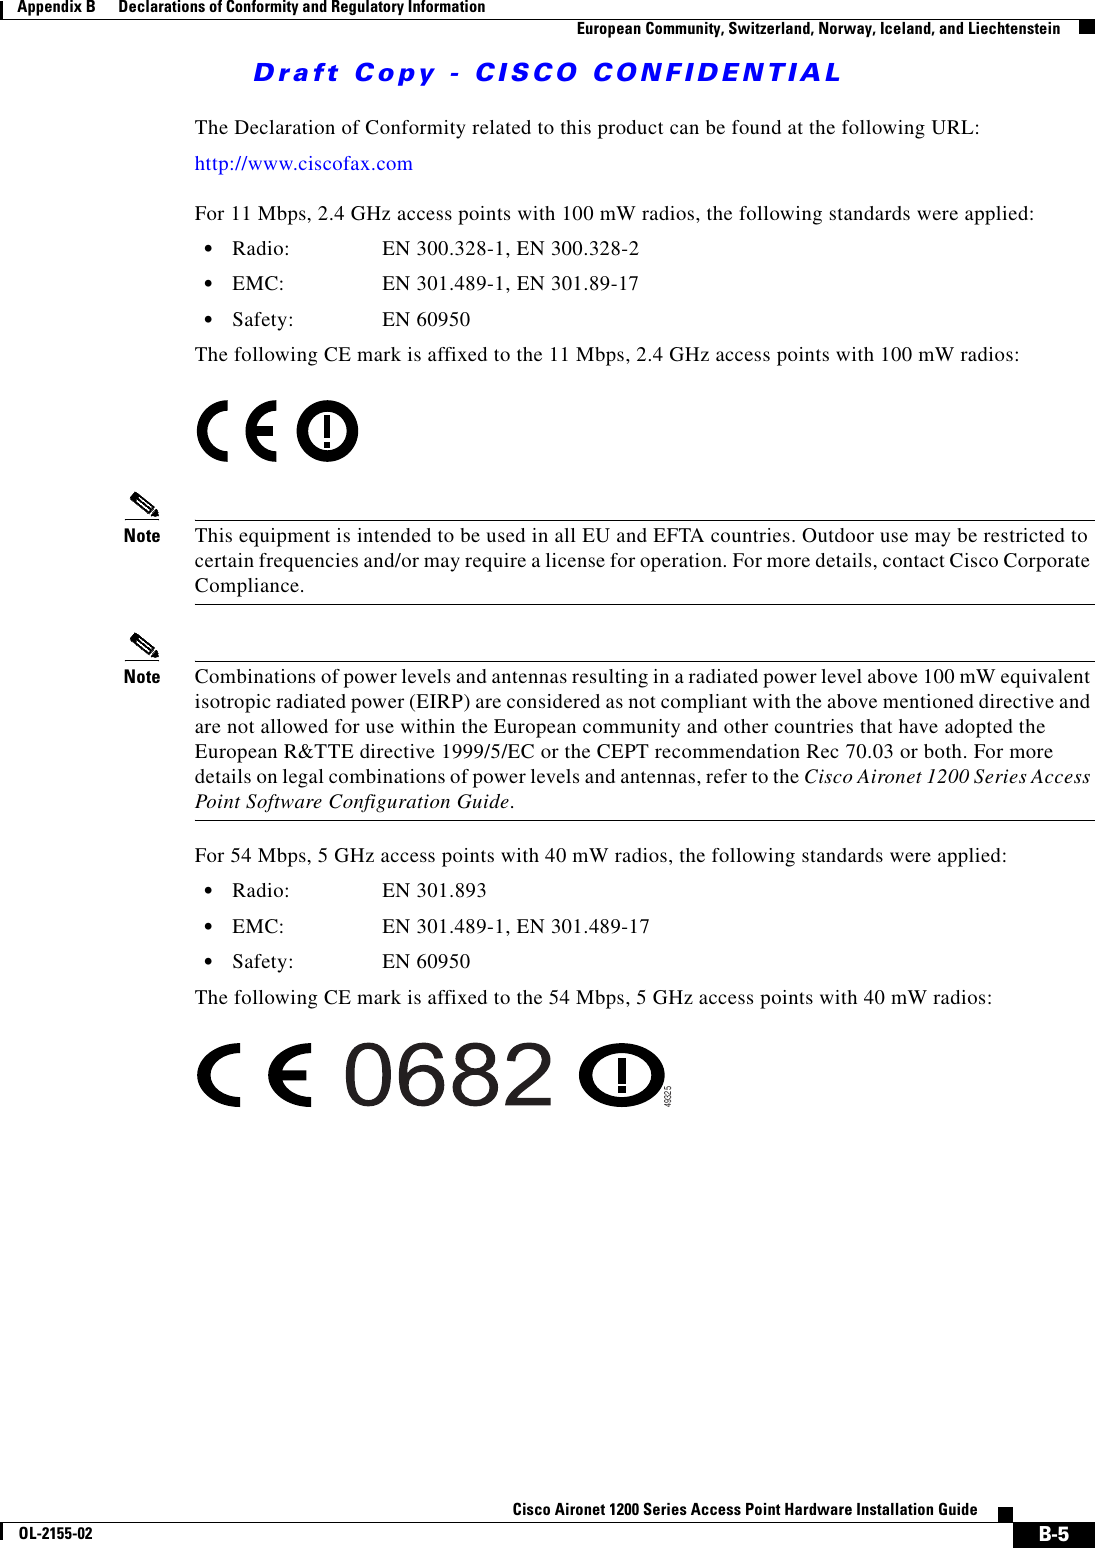 Draft Copy - CISCO CONFIDENTIAL B-5Cisco Aironet 1200 Series Access Point Hardware Installation GuideOL-2155-02Appendix B      Declarations of Conformity and Regulatory InformationEuropean Community, Switzerland, Norway, Iceland, and LiechtensteinThe Declaration of Conformity related to this product can be found at the following URL:http://www.ciscofax.comFor 11 Mbps, 2.4 GHz access points with 100 mW radios, the following standards were applied:•Radio: EN 300.328-1, EN 300.328-2•EMC: EN 301.489-1, EN 301.89-17•Safety: EN 60950The following CE mark is affixed to the 11 Mbps, 2.4 GHz access points with 100 mW radios:Note This equipment is intended to be used in all EU and EFTA countries. Outdoor use may be restricted to certain frequencies and/or may require a license for operation. For more details, contact Cisco Corporate Compliance.Note Combinations of power levels and antennas resulting in a radiated power level above 100 mW equivalent isotropic radiated power (EIRP) are considered as not compliant with the above mentioned directive and are not allowed for use within the European community and other countries that have adopted the European R&amp;TTE directive 1999/5/EC or the CEPT recommendation Rec 70.03 or both. For more details on legal combinations of power levels and antennas, refer to the Cisco Aironet 1200 Series Access Point Software Configuration Guide.For 54 Mbps, 5 GHz access points with 40 mW radios, the following standards were applied:•Radio: EN 301.893•EMC: EN 301.489-1, EN 301.489-17•Safety: EN 60950The following CE mark is affixed to the 54 Mbps, 5 GHz access points with 40 mW radios:49325